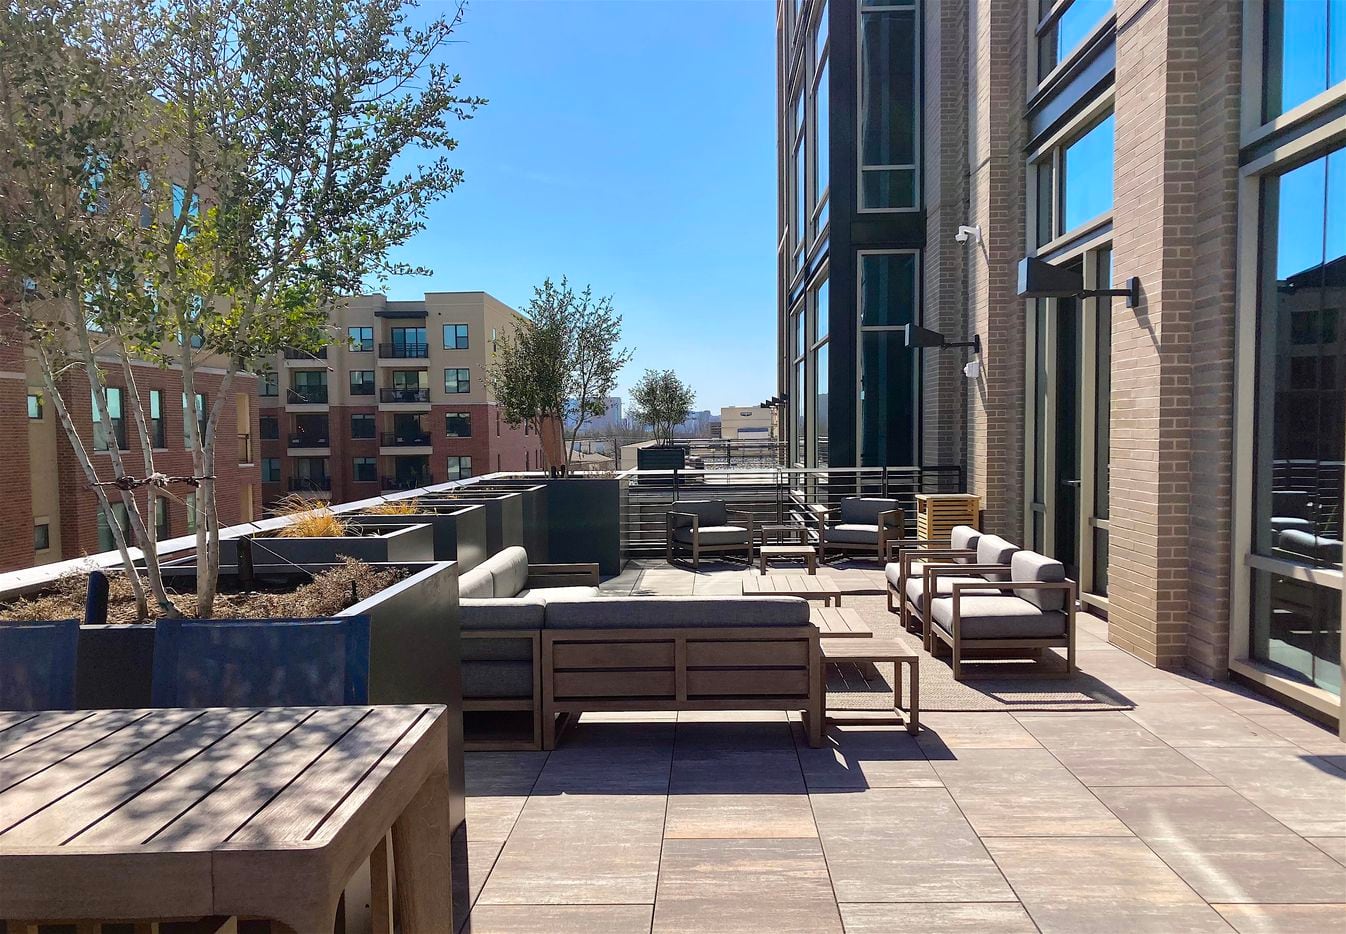 An outdoor terrace for tenants of the new Weir's Plaza tower on Knox Street.